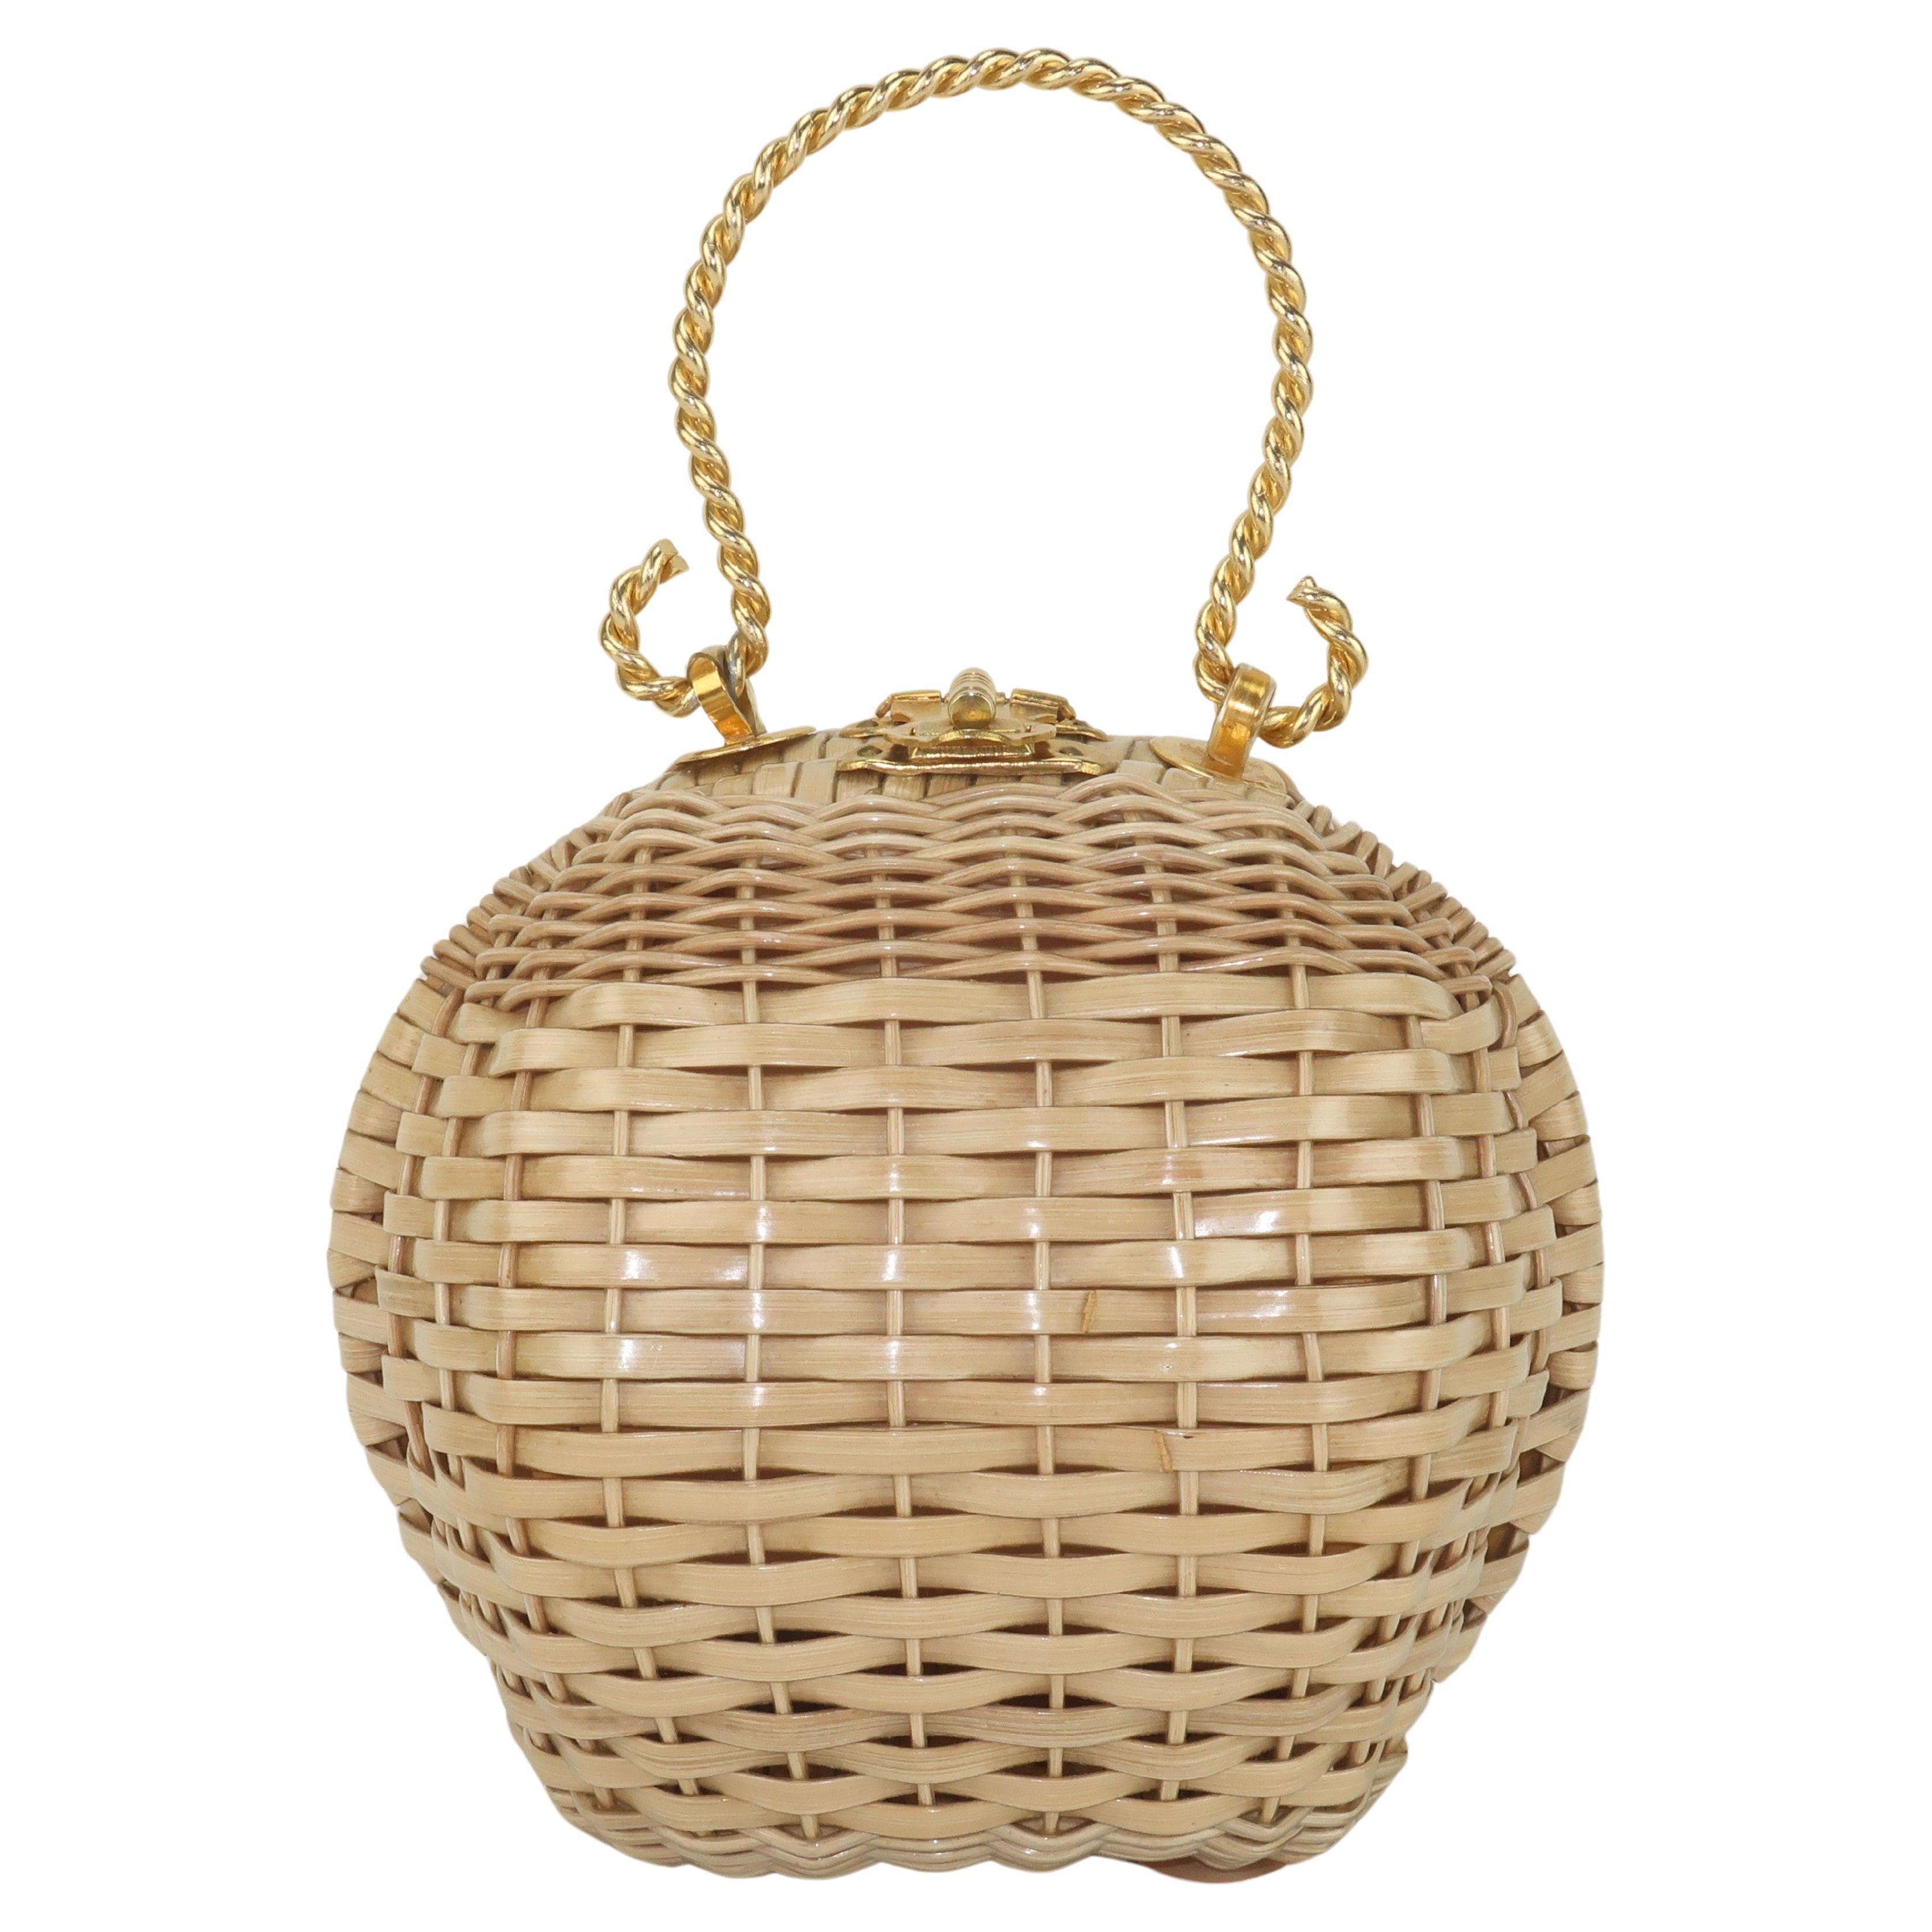 Wicker Ball Shaped Handbag With Gold Handle, 1960's For Sale